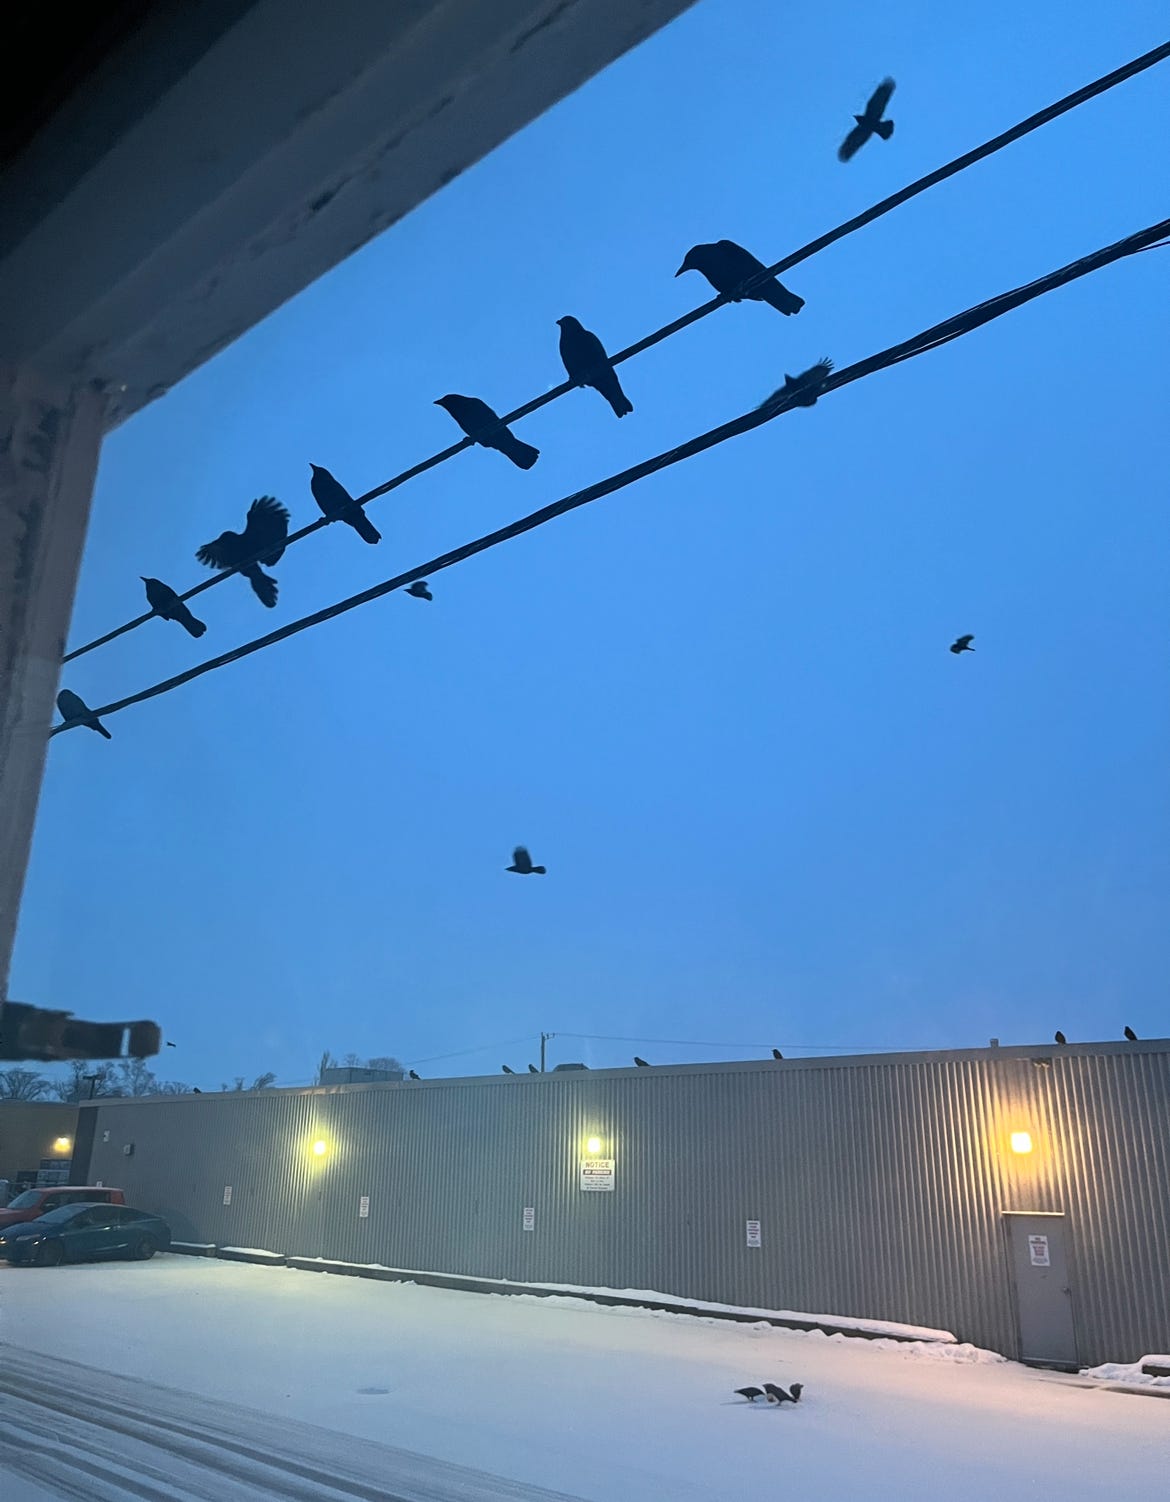 Several dozen crows are visible out my front window. They sit on the utility lines, dot the sky, and sit on the snowy ground.